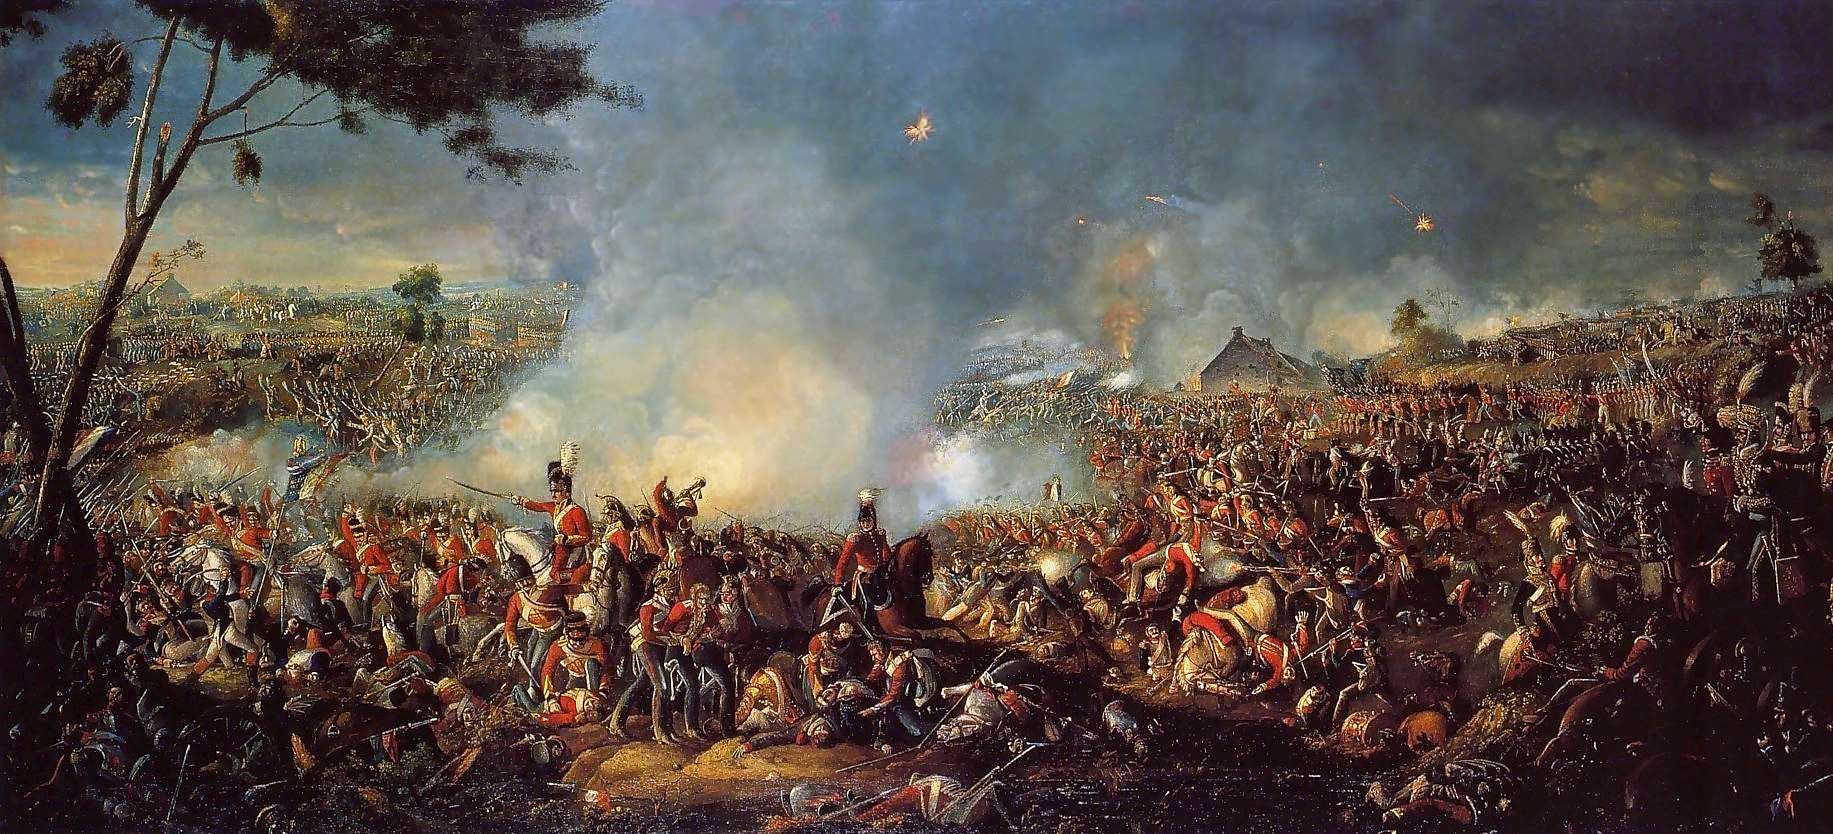 The Battle of Waterloo, by William Sadler